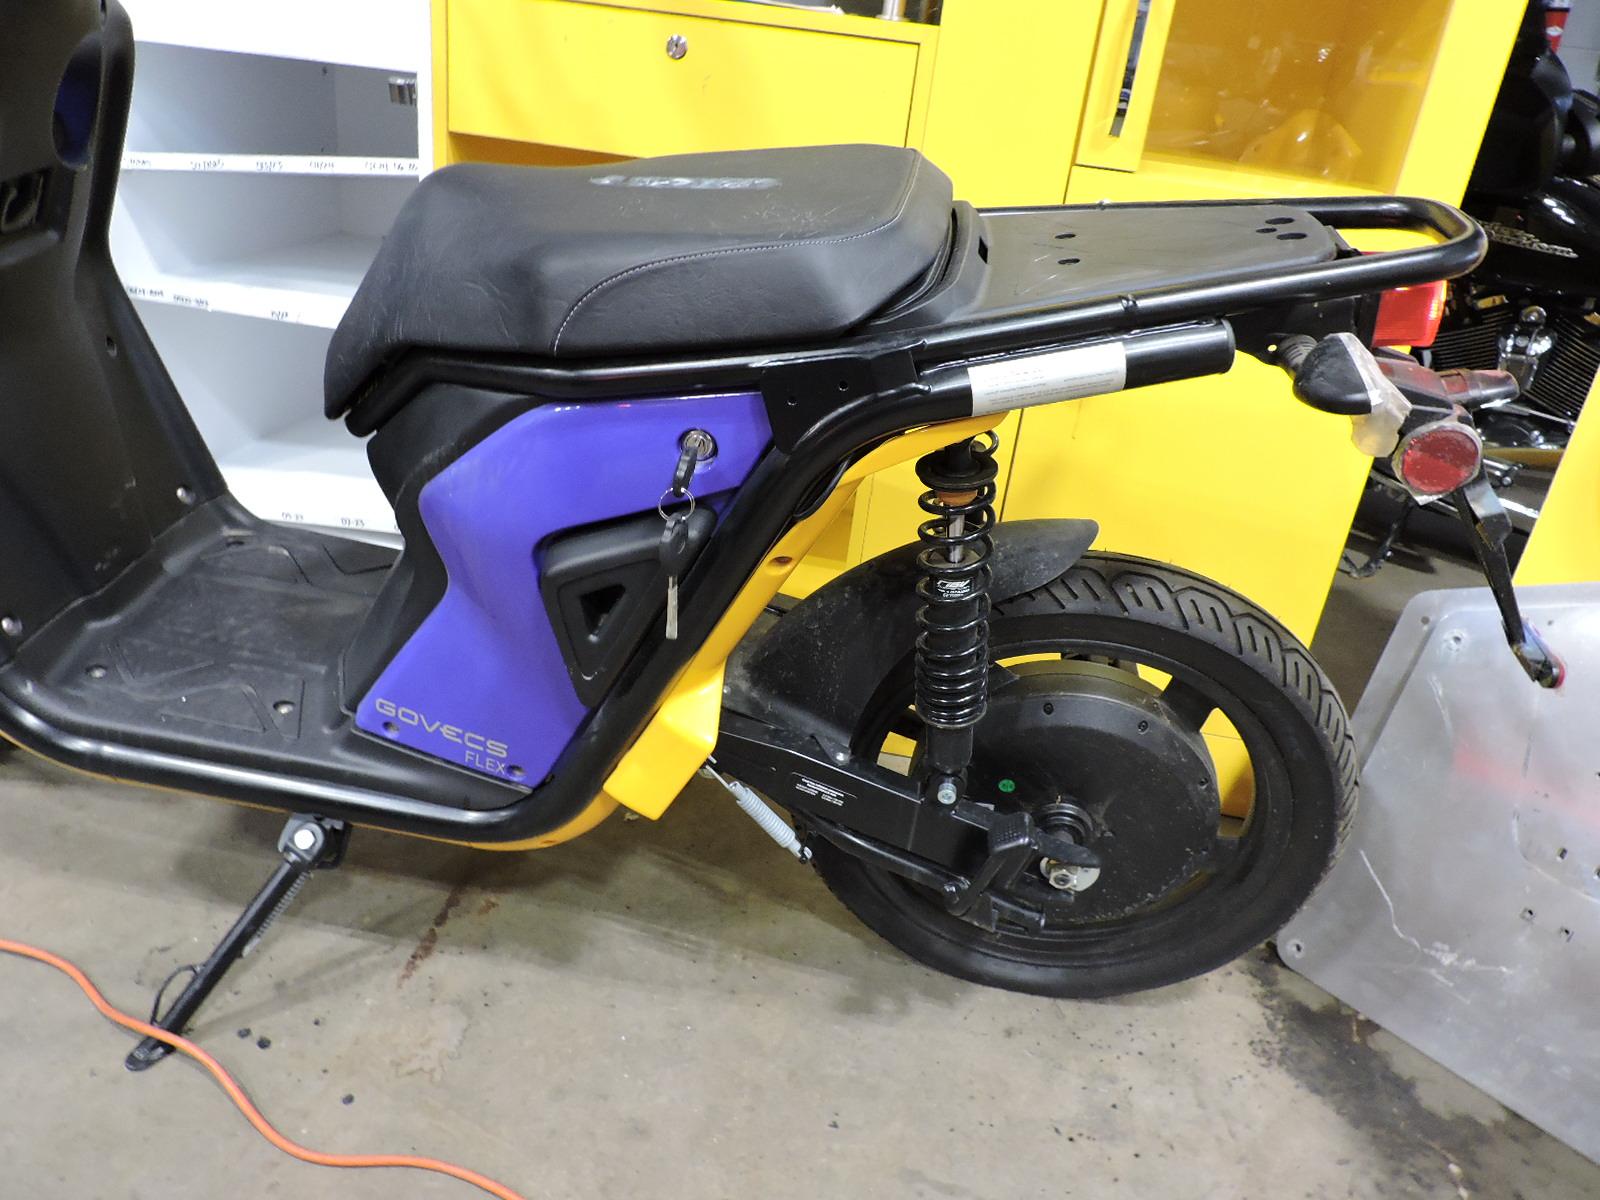 GOVECS FLEX 2.0 - Electric Scooter - Moped / 0.9 Miles / 2 Keys, Battery & Charger - Runs Well